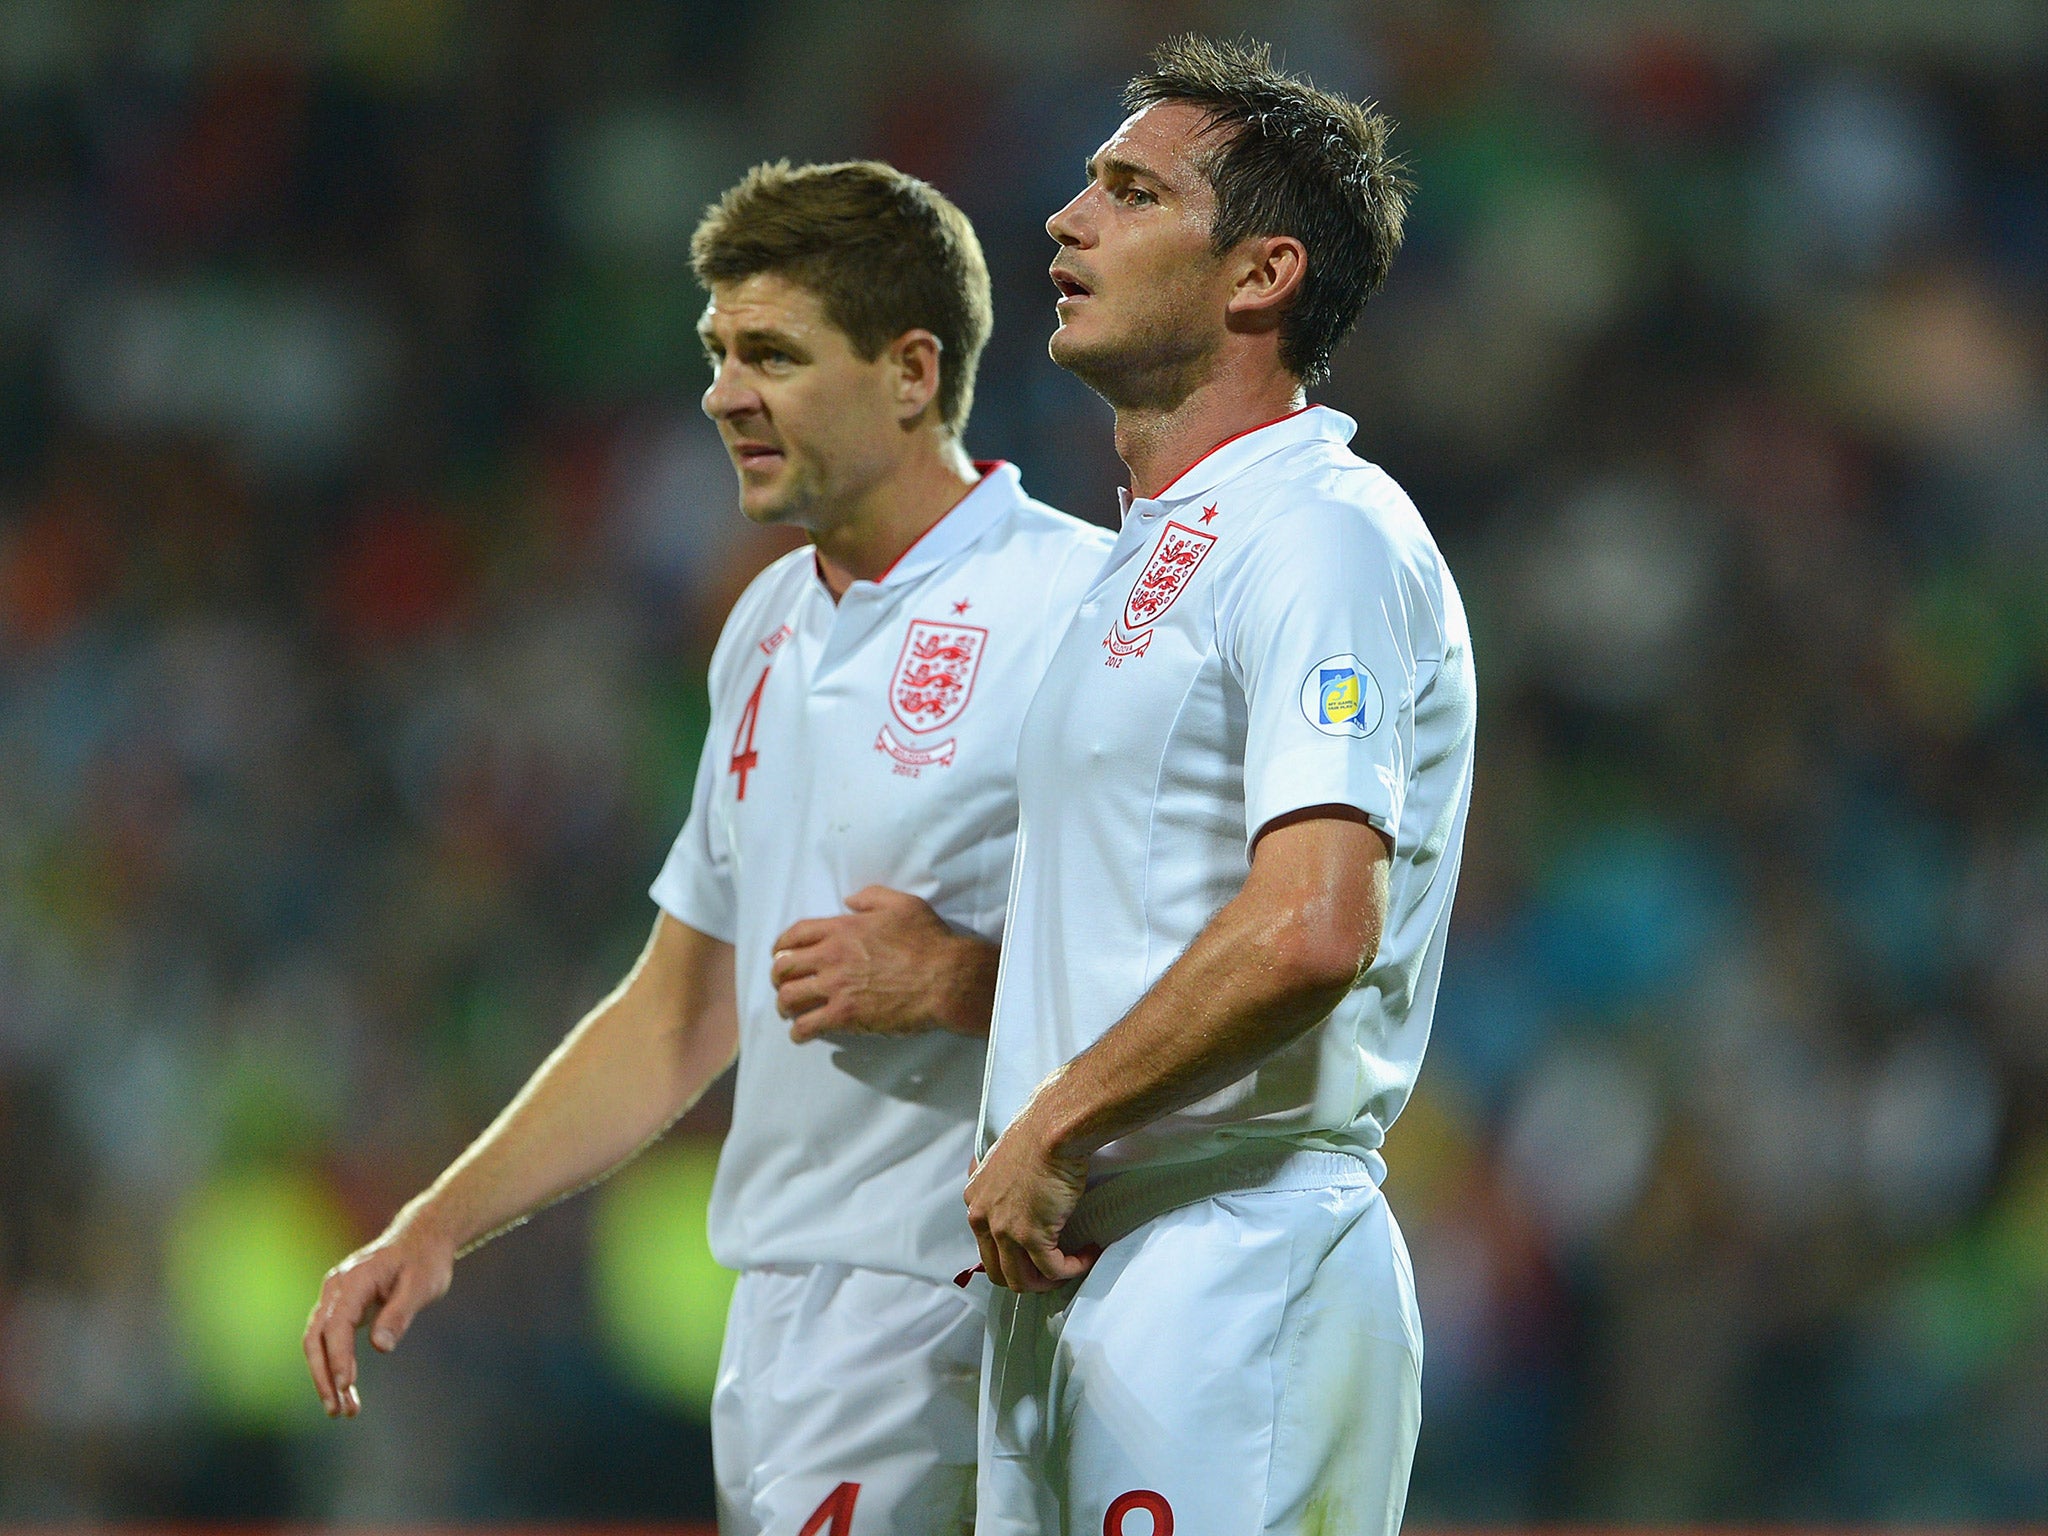 Steven Gerrard and Frank Lampard both staked their claim to be involved in the England set-up